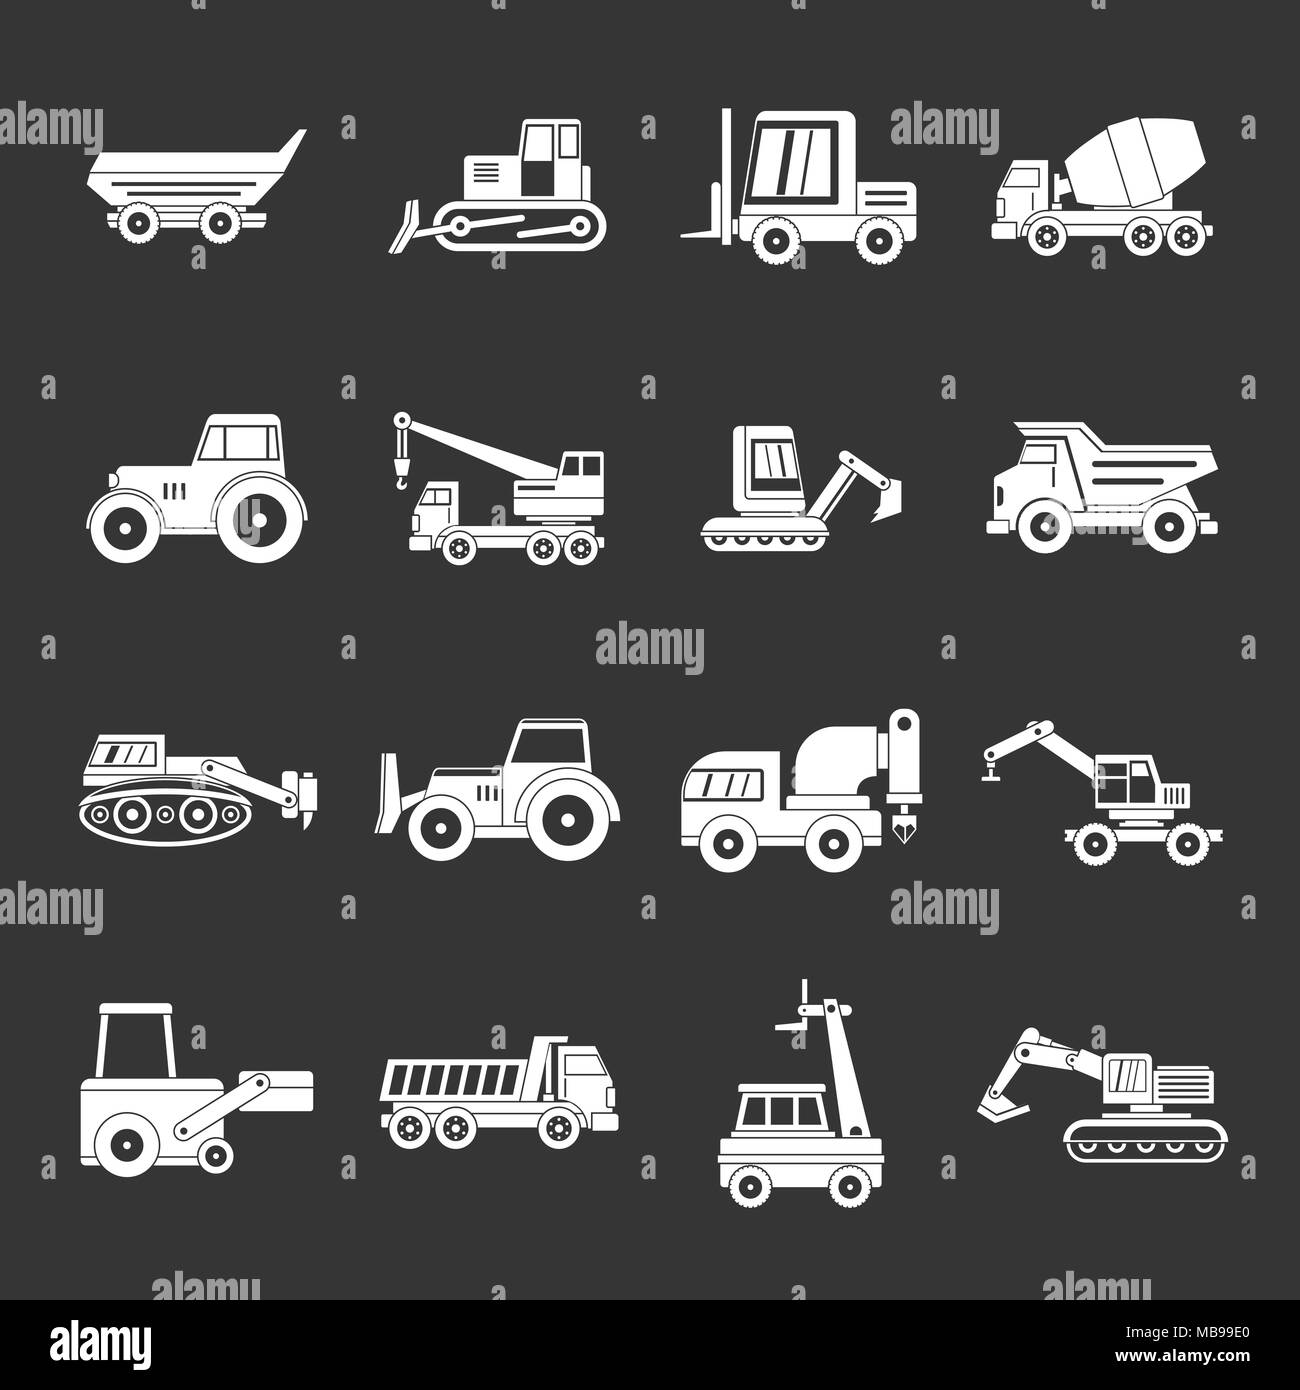 Building vehicles icons set grey vector Stock Vector